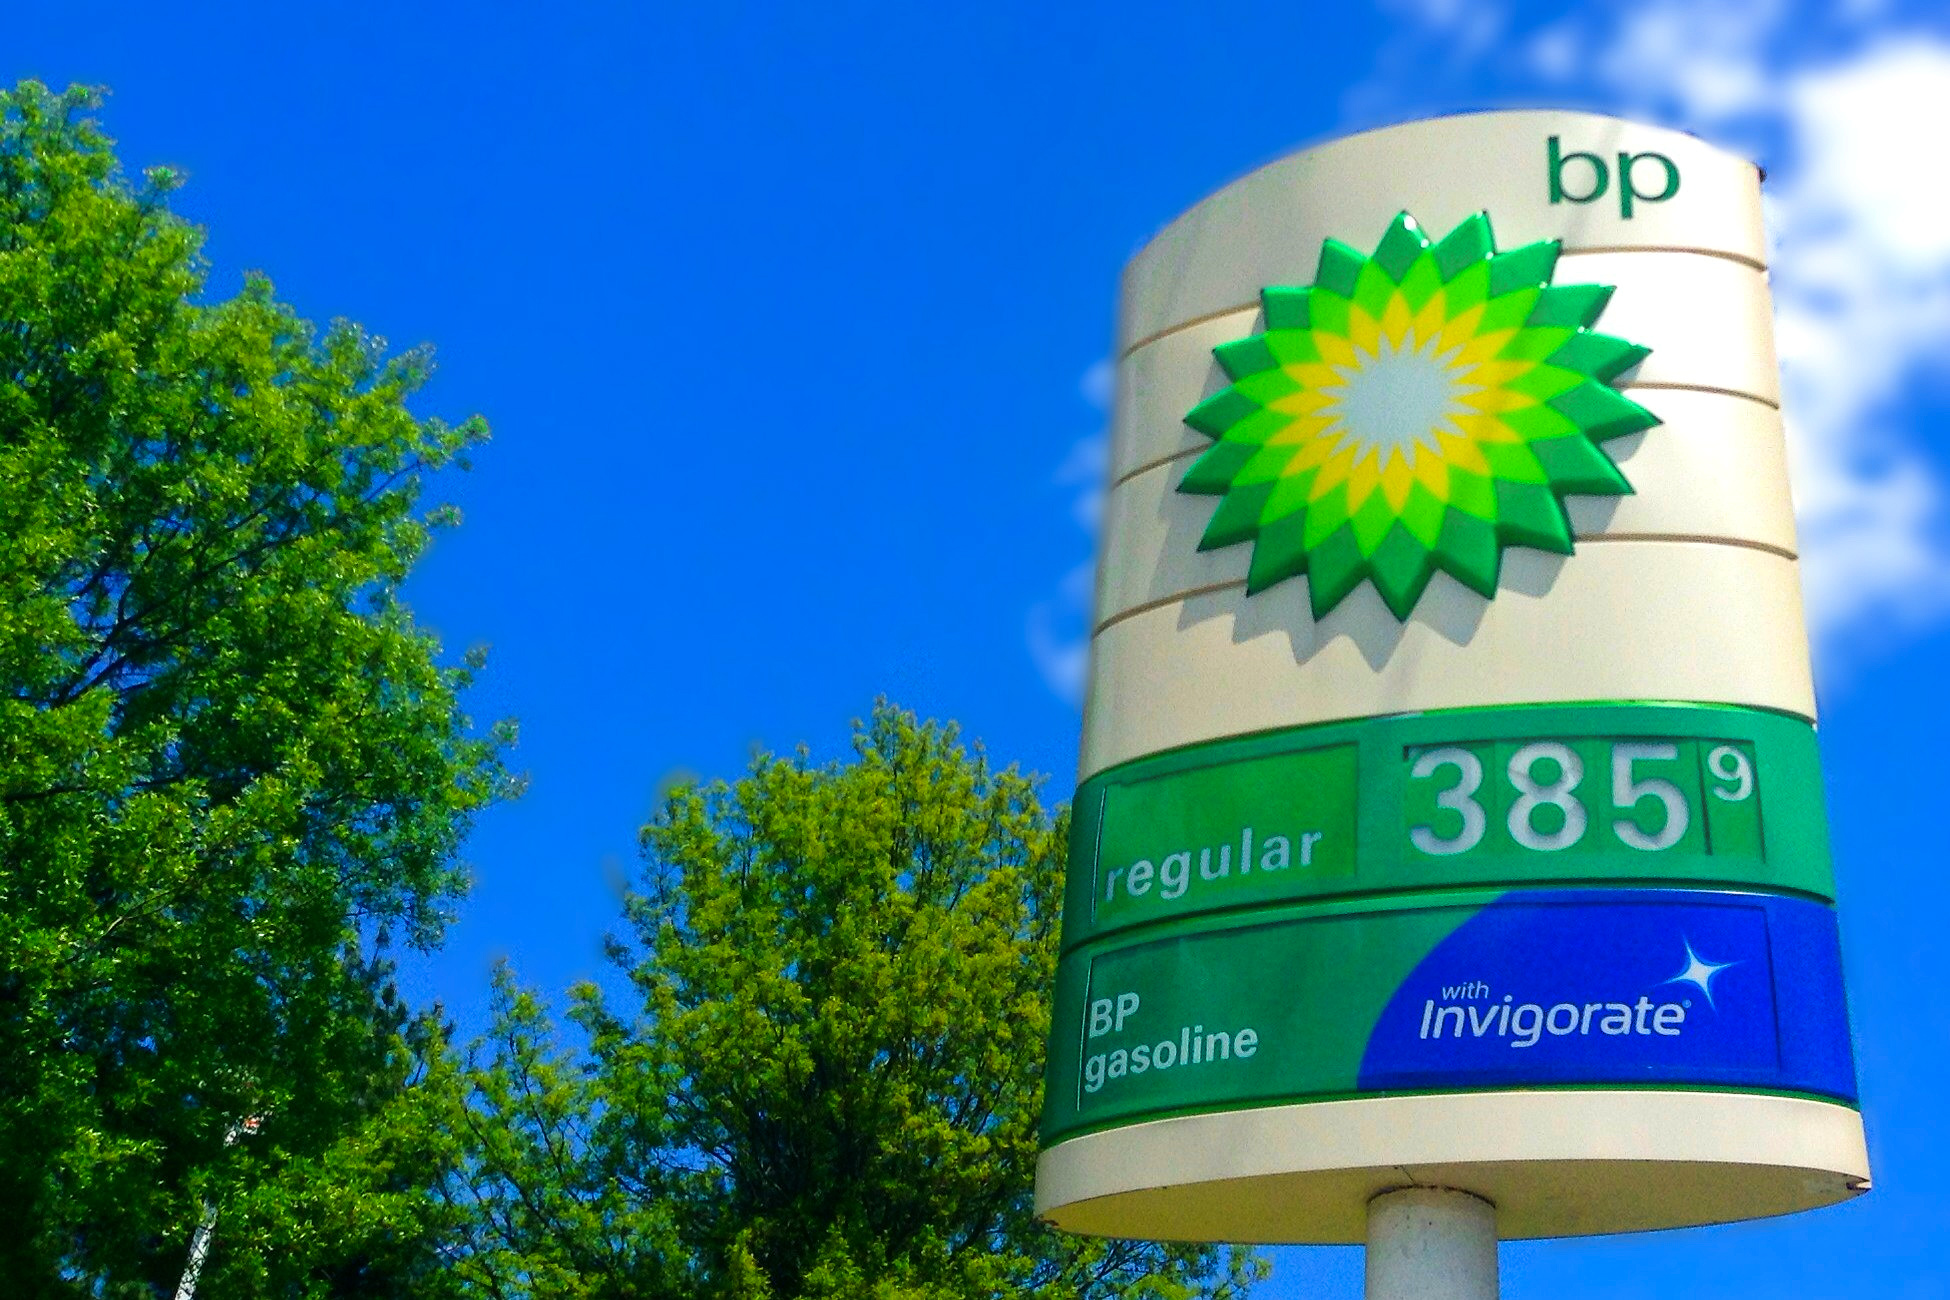 BP Criticized for Plan to Spend Billions More on Fossil Fuels Than Green Energy